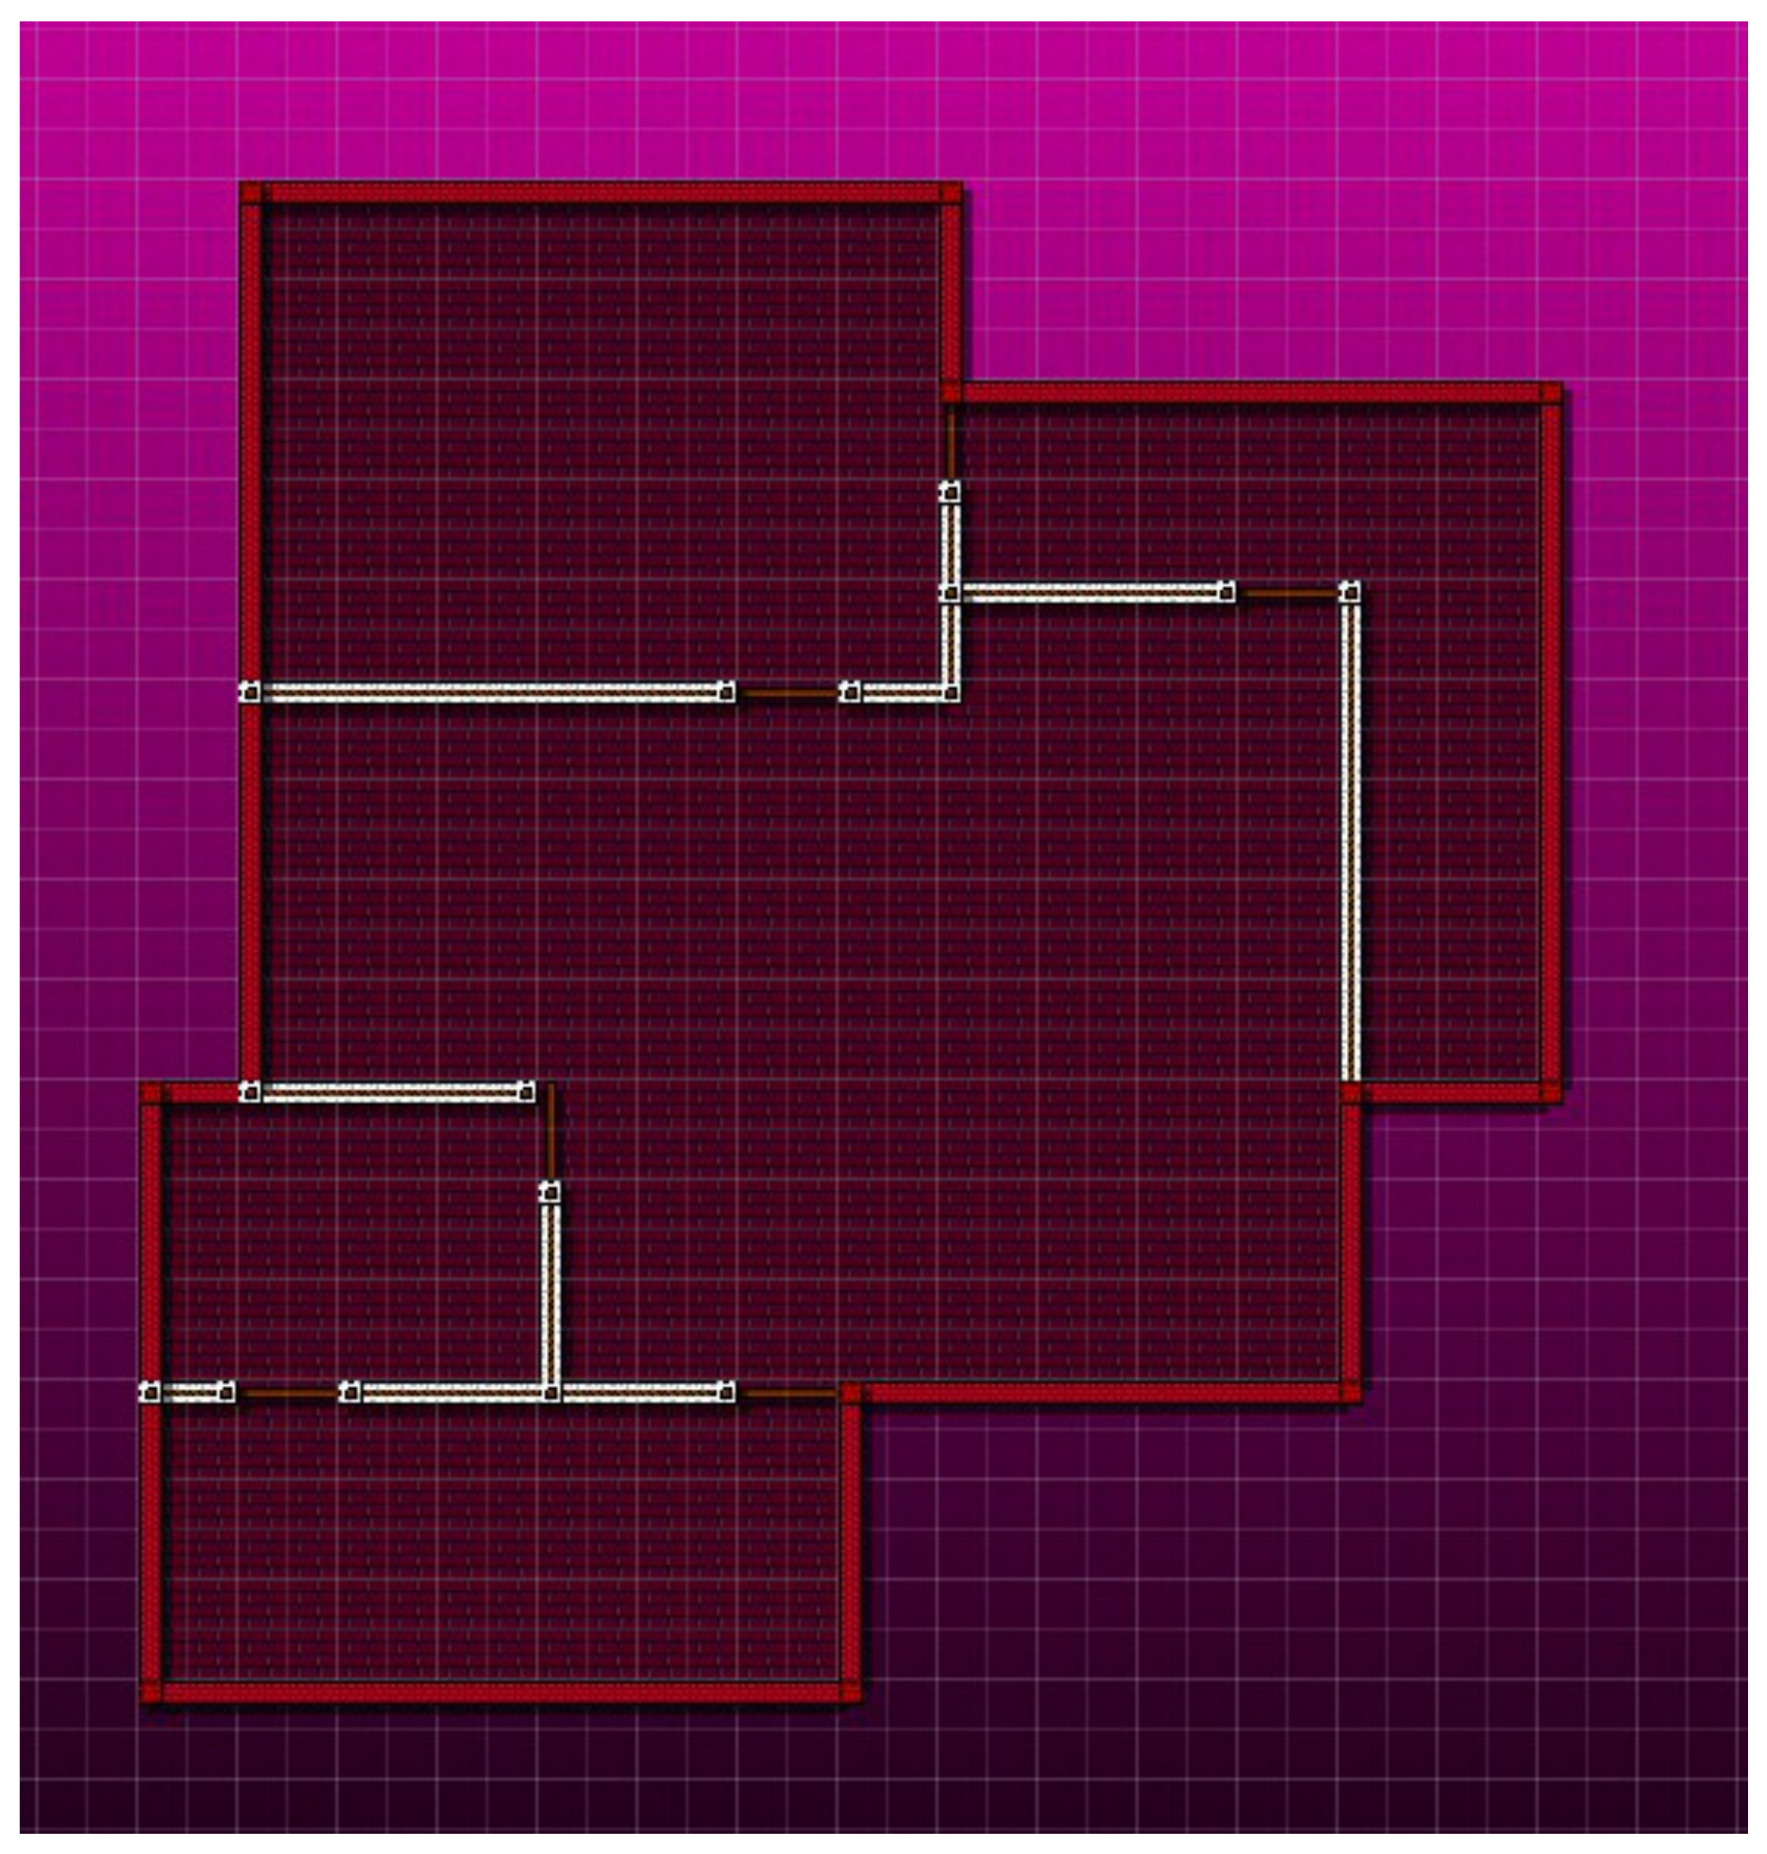 hotline miami 2 stronghold map